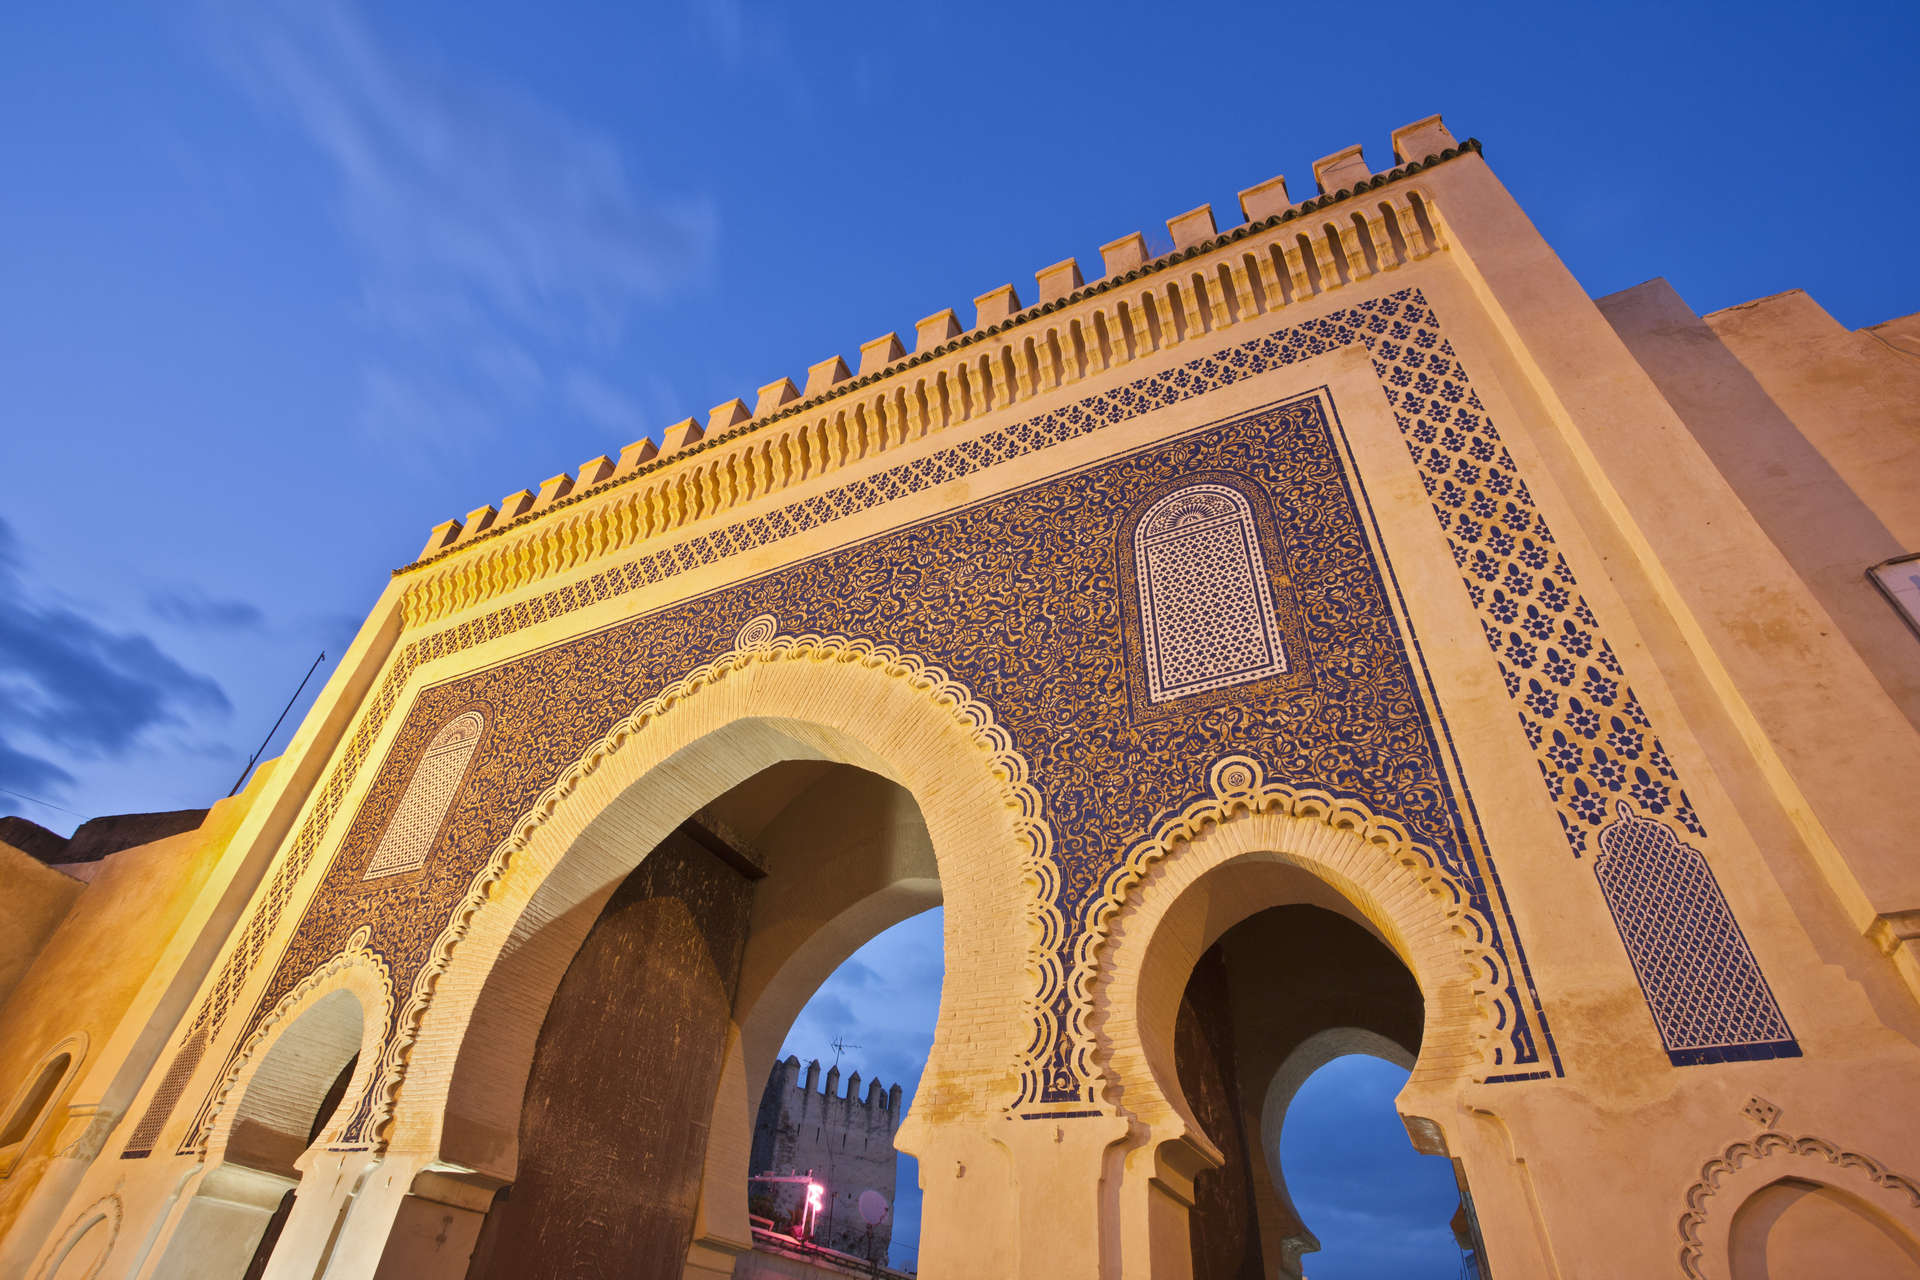 Morocco's ancient imperial city of Fes